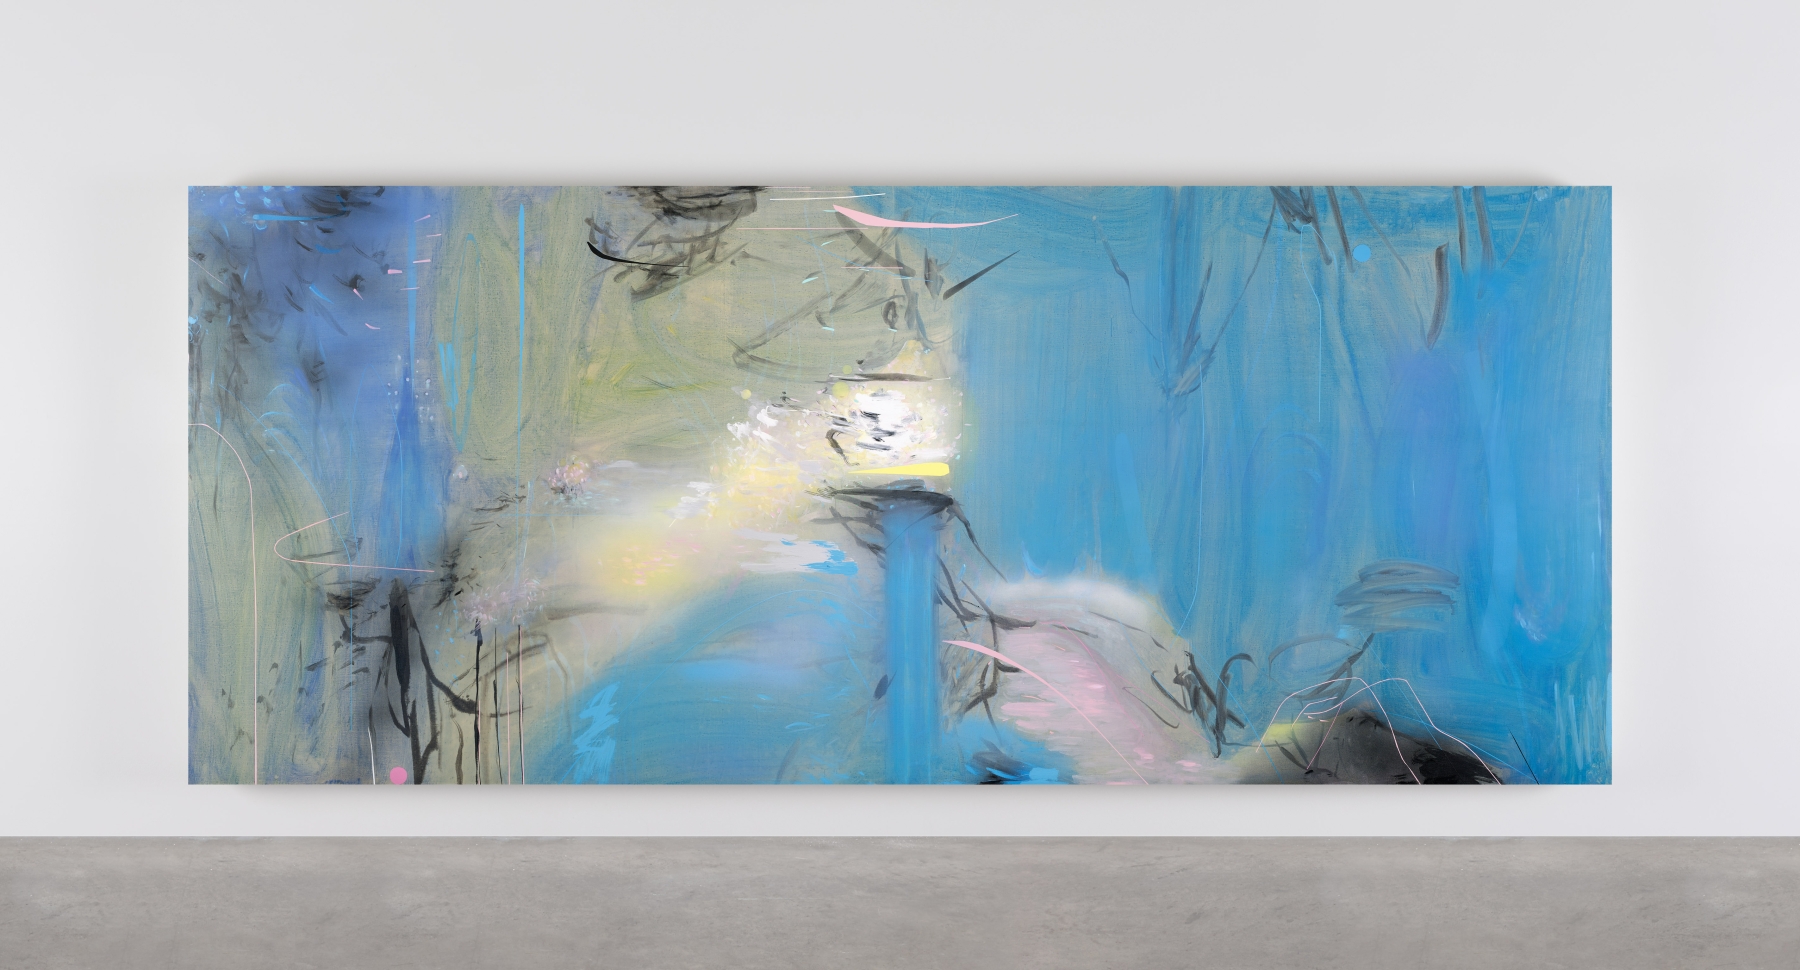 Landscape of nowhere: Water and dreams No.1
2022
mixed media on canvas
250 x 600 cm / 98.4 x 236.2 in
ZL02322